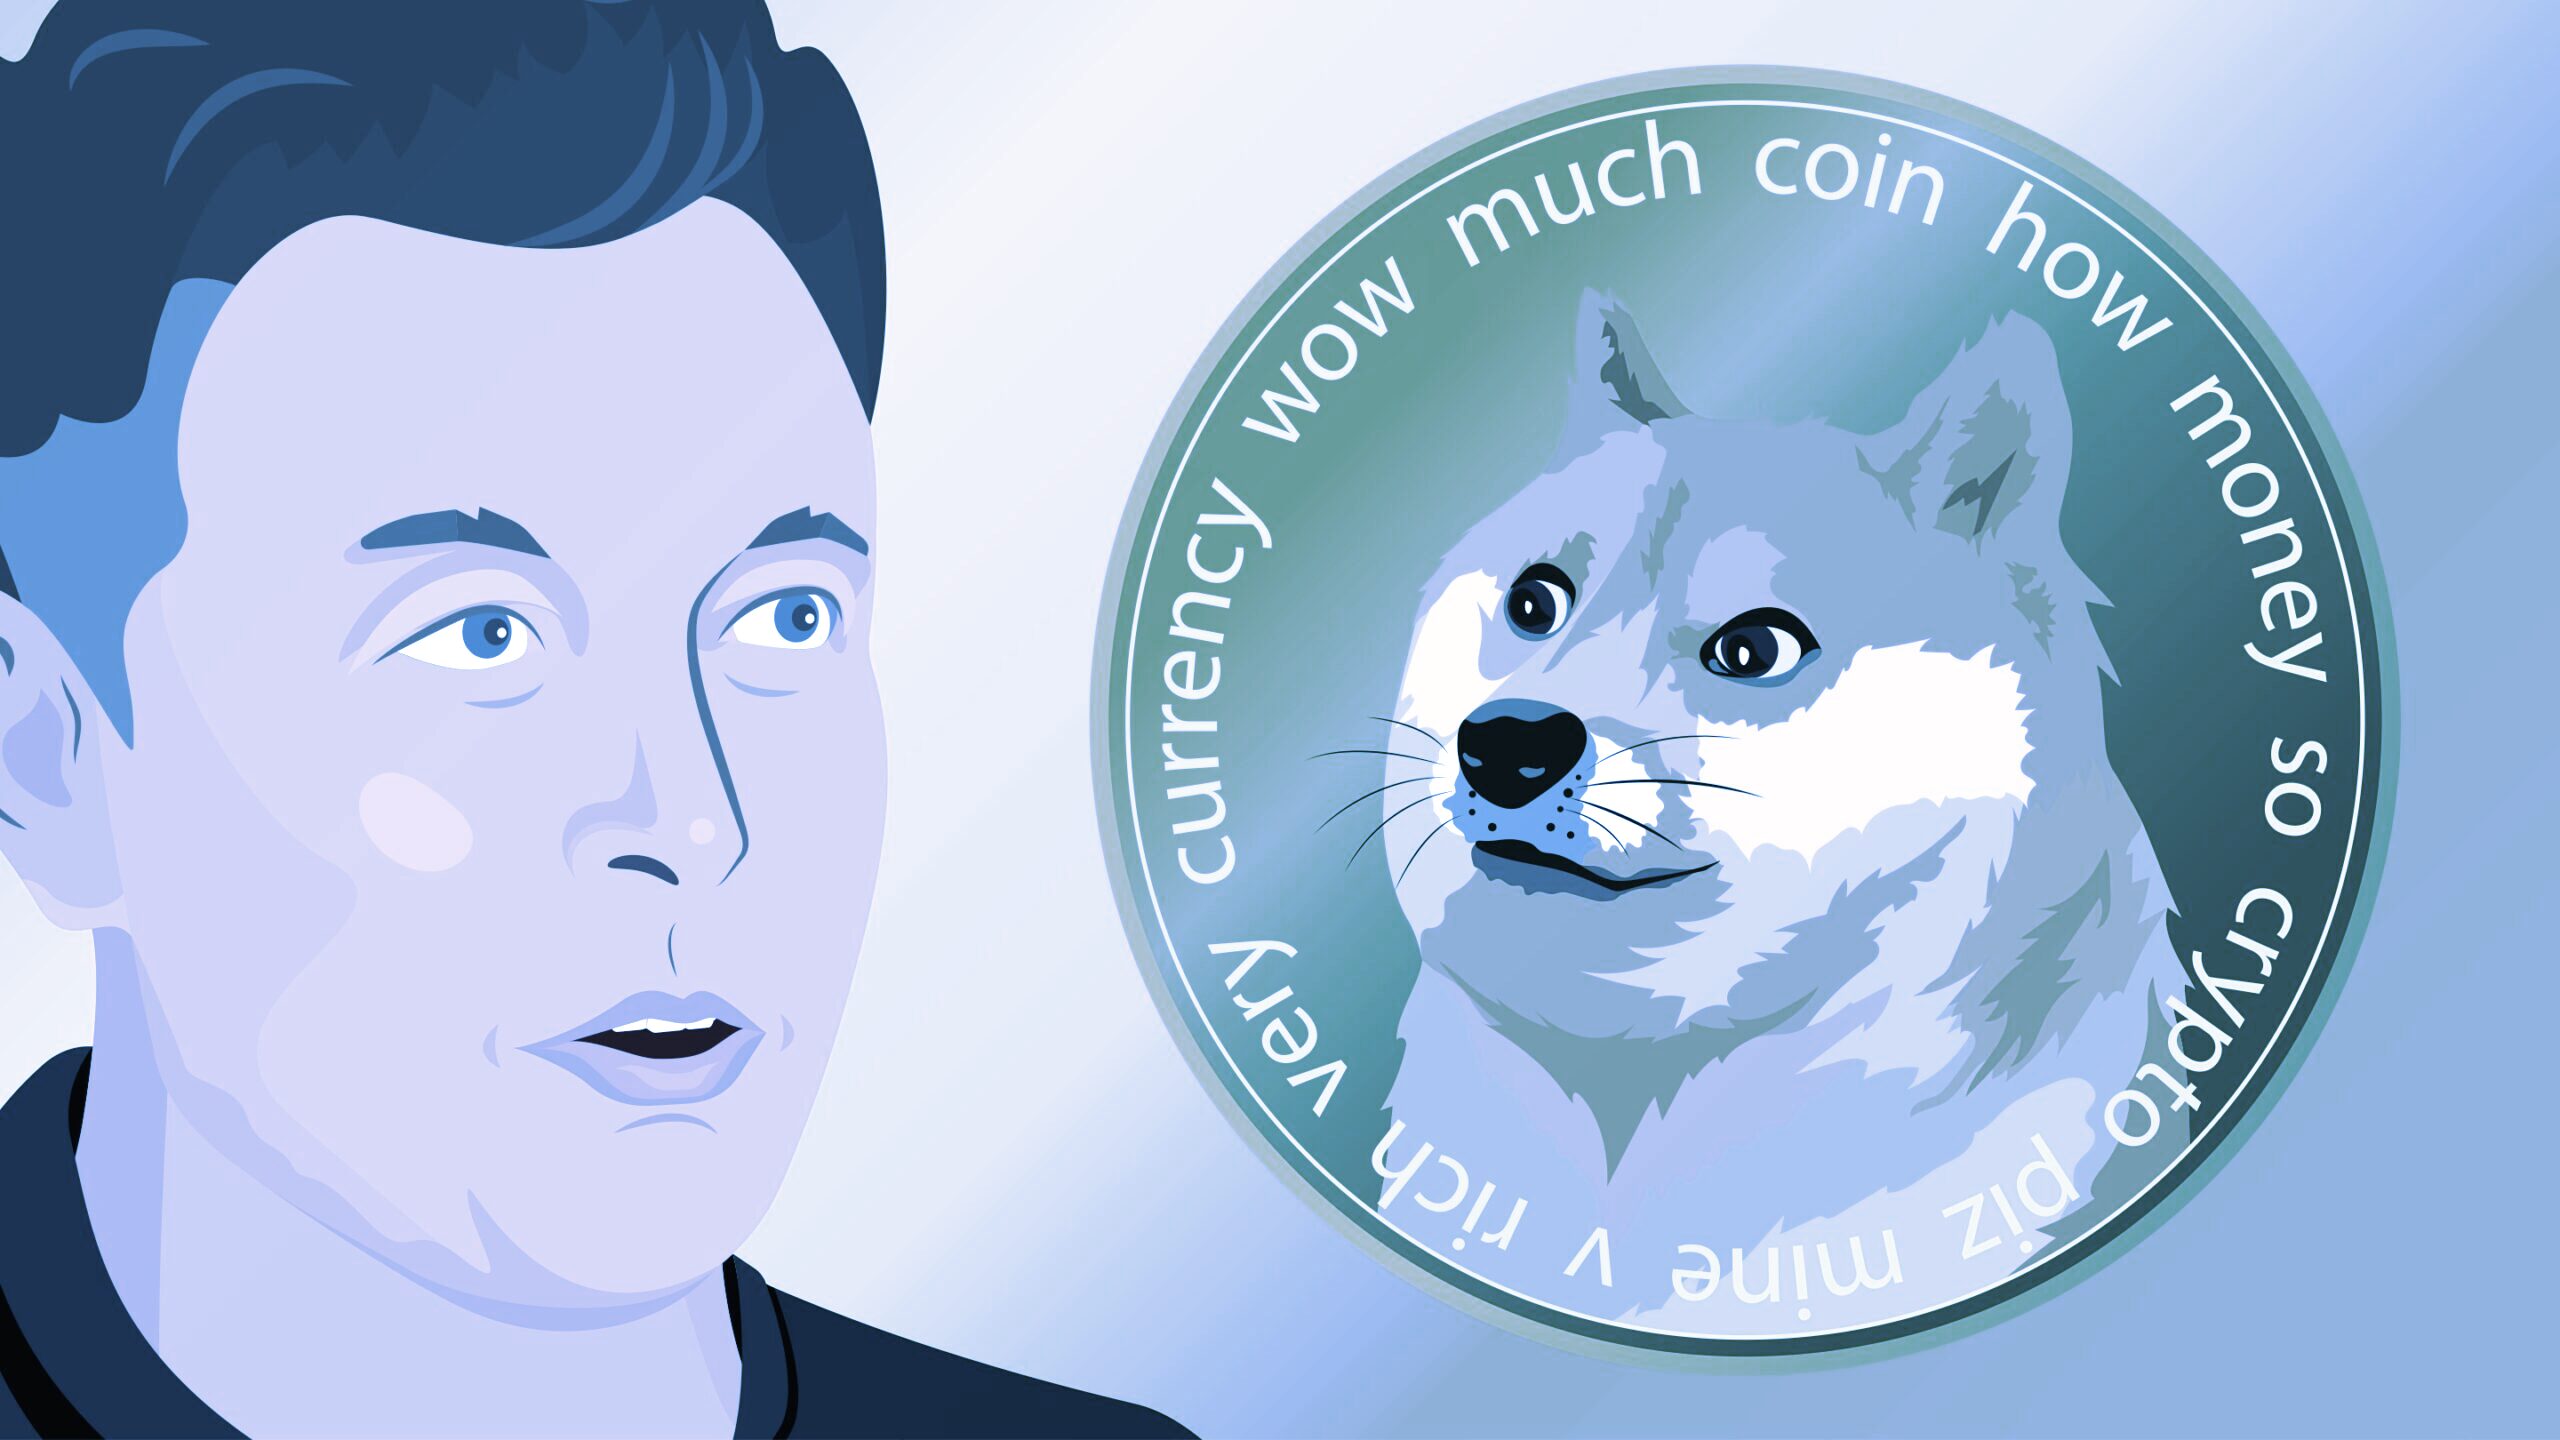 This Week in Coins: Bitcoin and Ethereum See Green Shoots, Dogecoin Gets Musk Twitter Bump